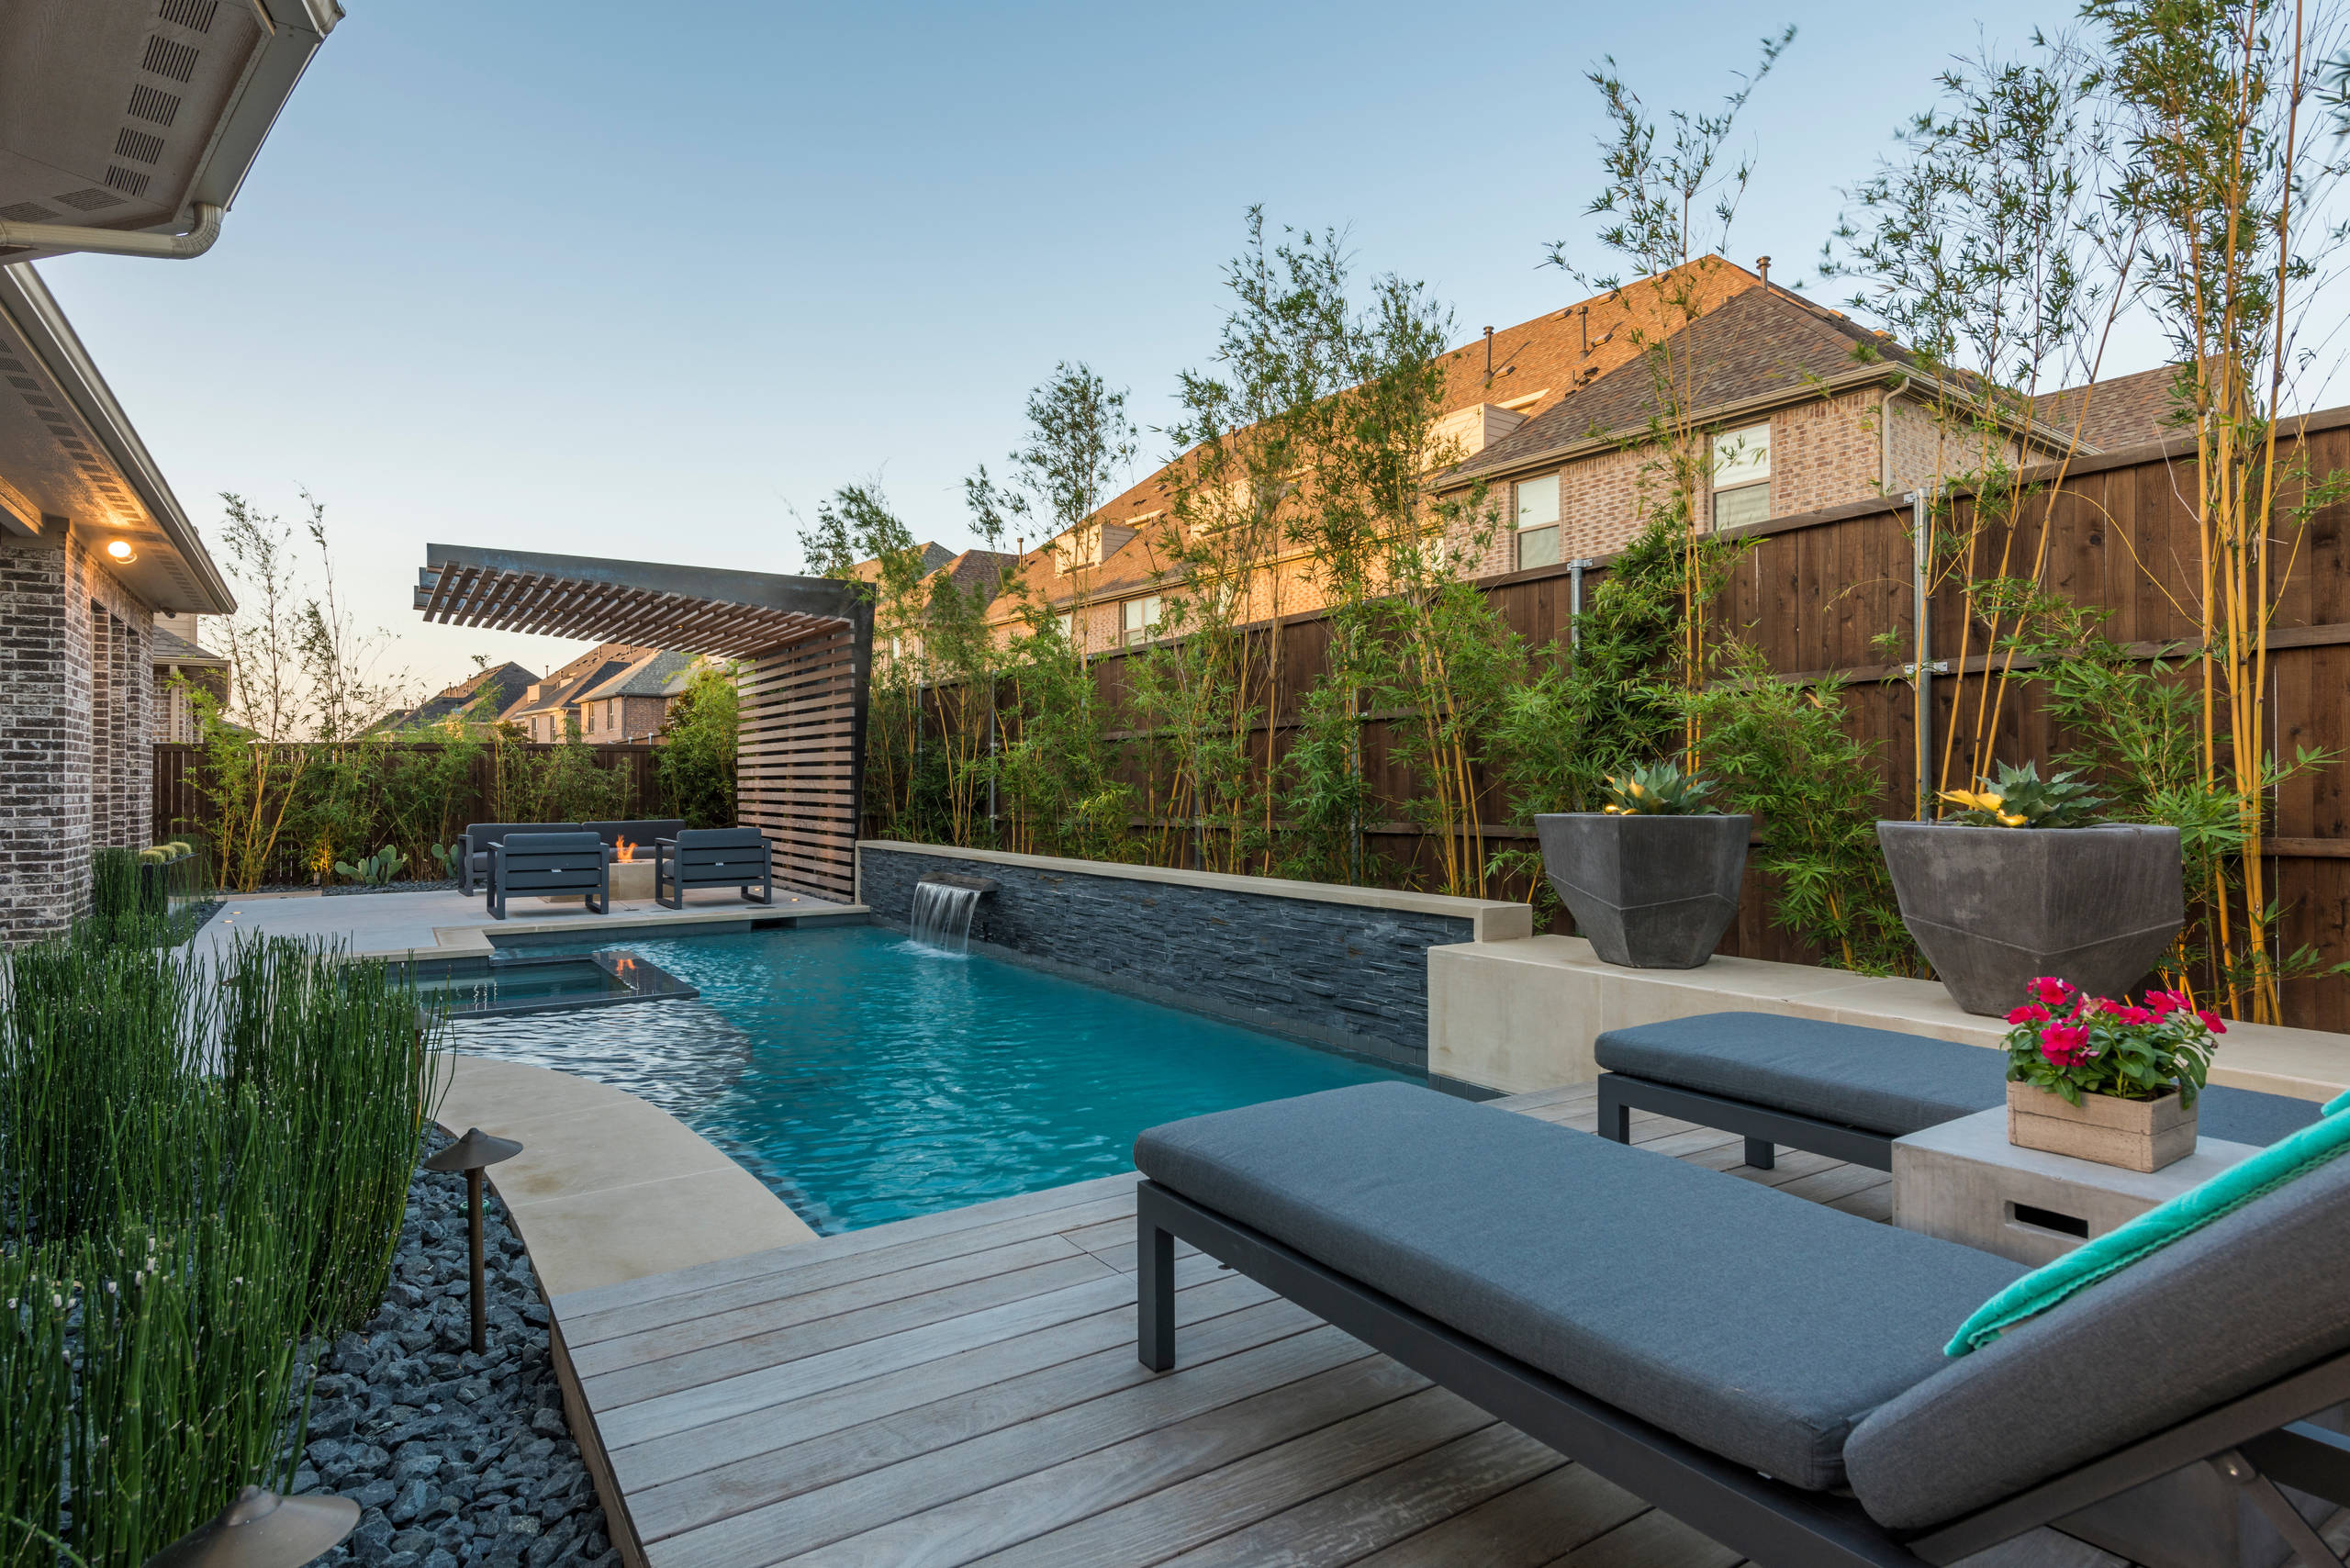 75 Beautiful Small Backyard Pool Pictures Ideas December 2020 Houzz